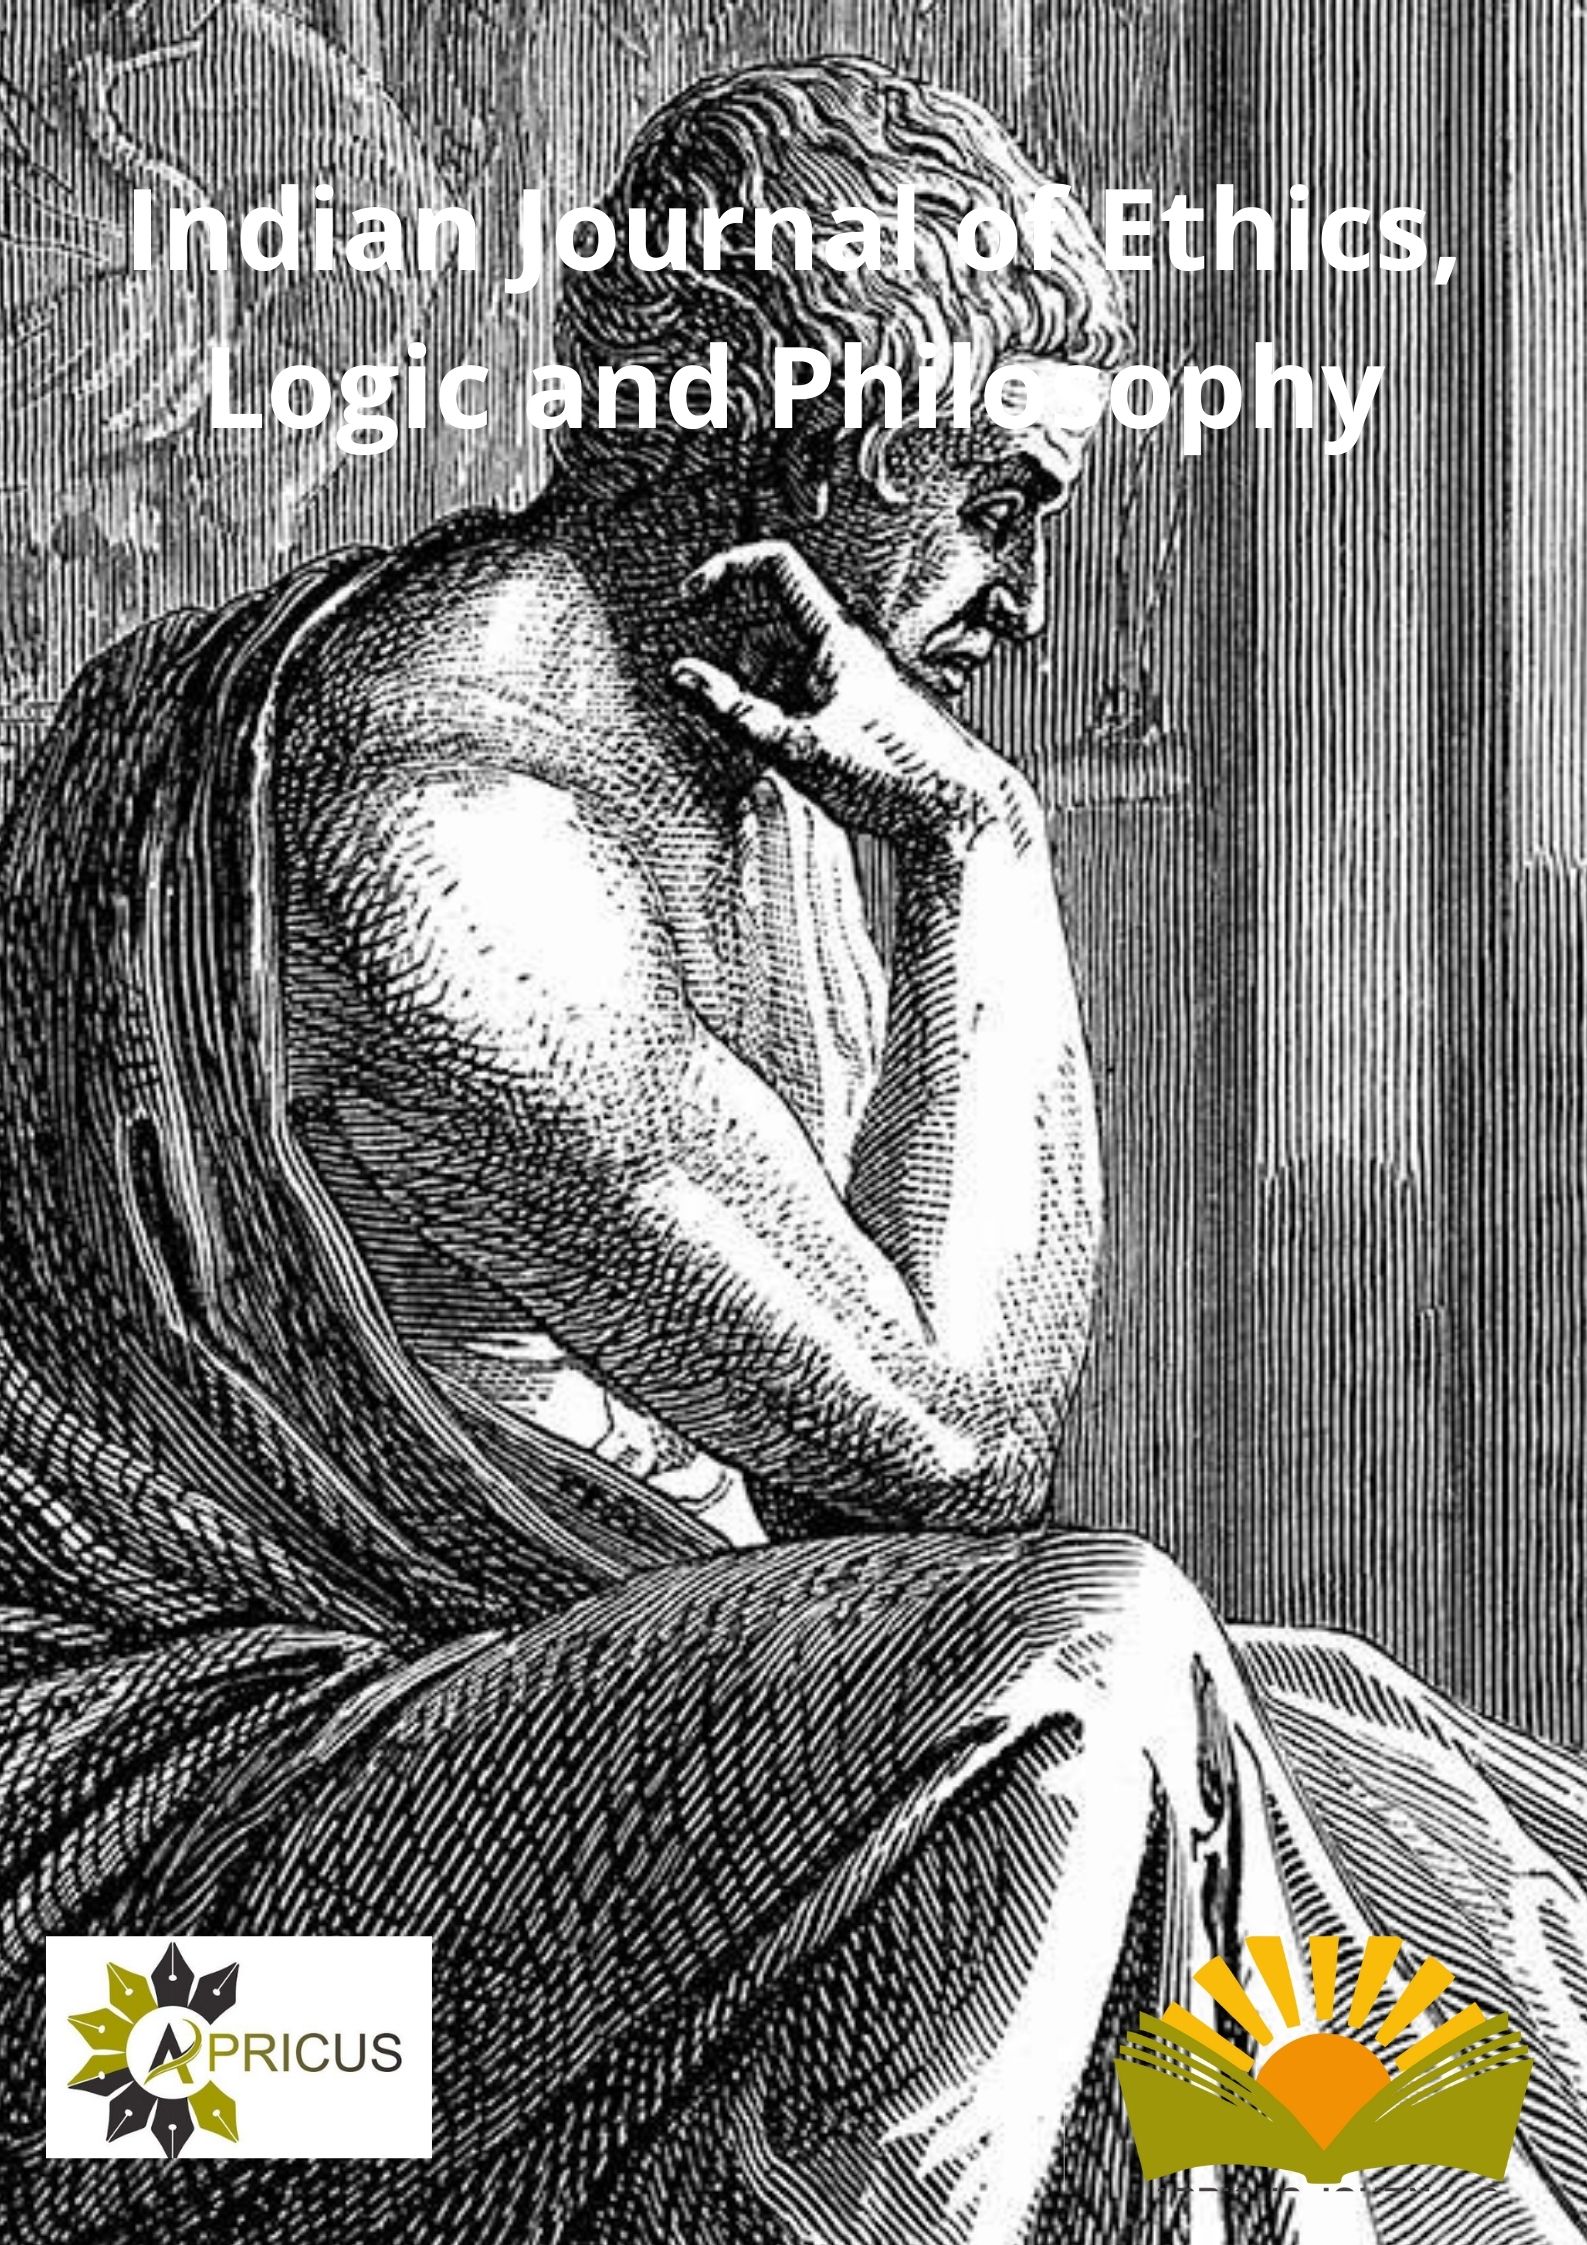 Indian Journal of Ethics, Logic and Philosophy  